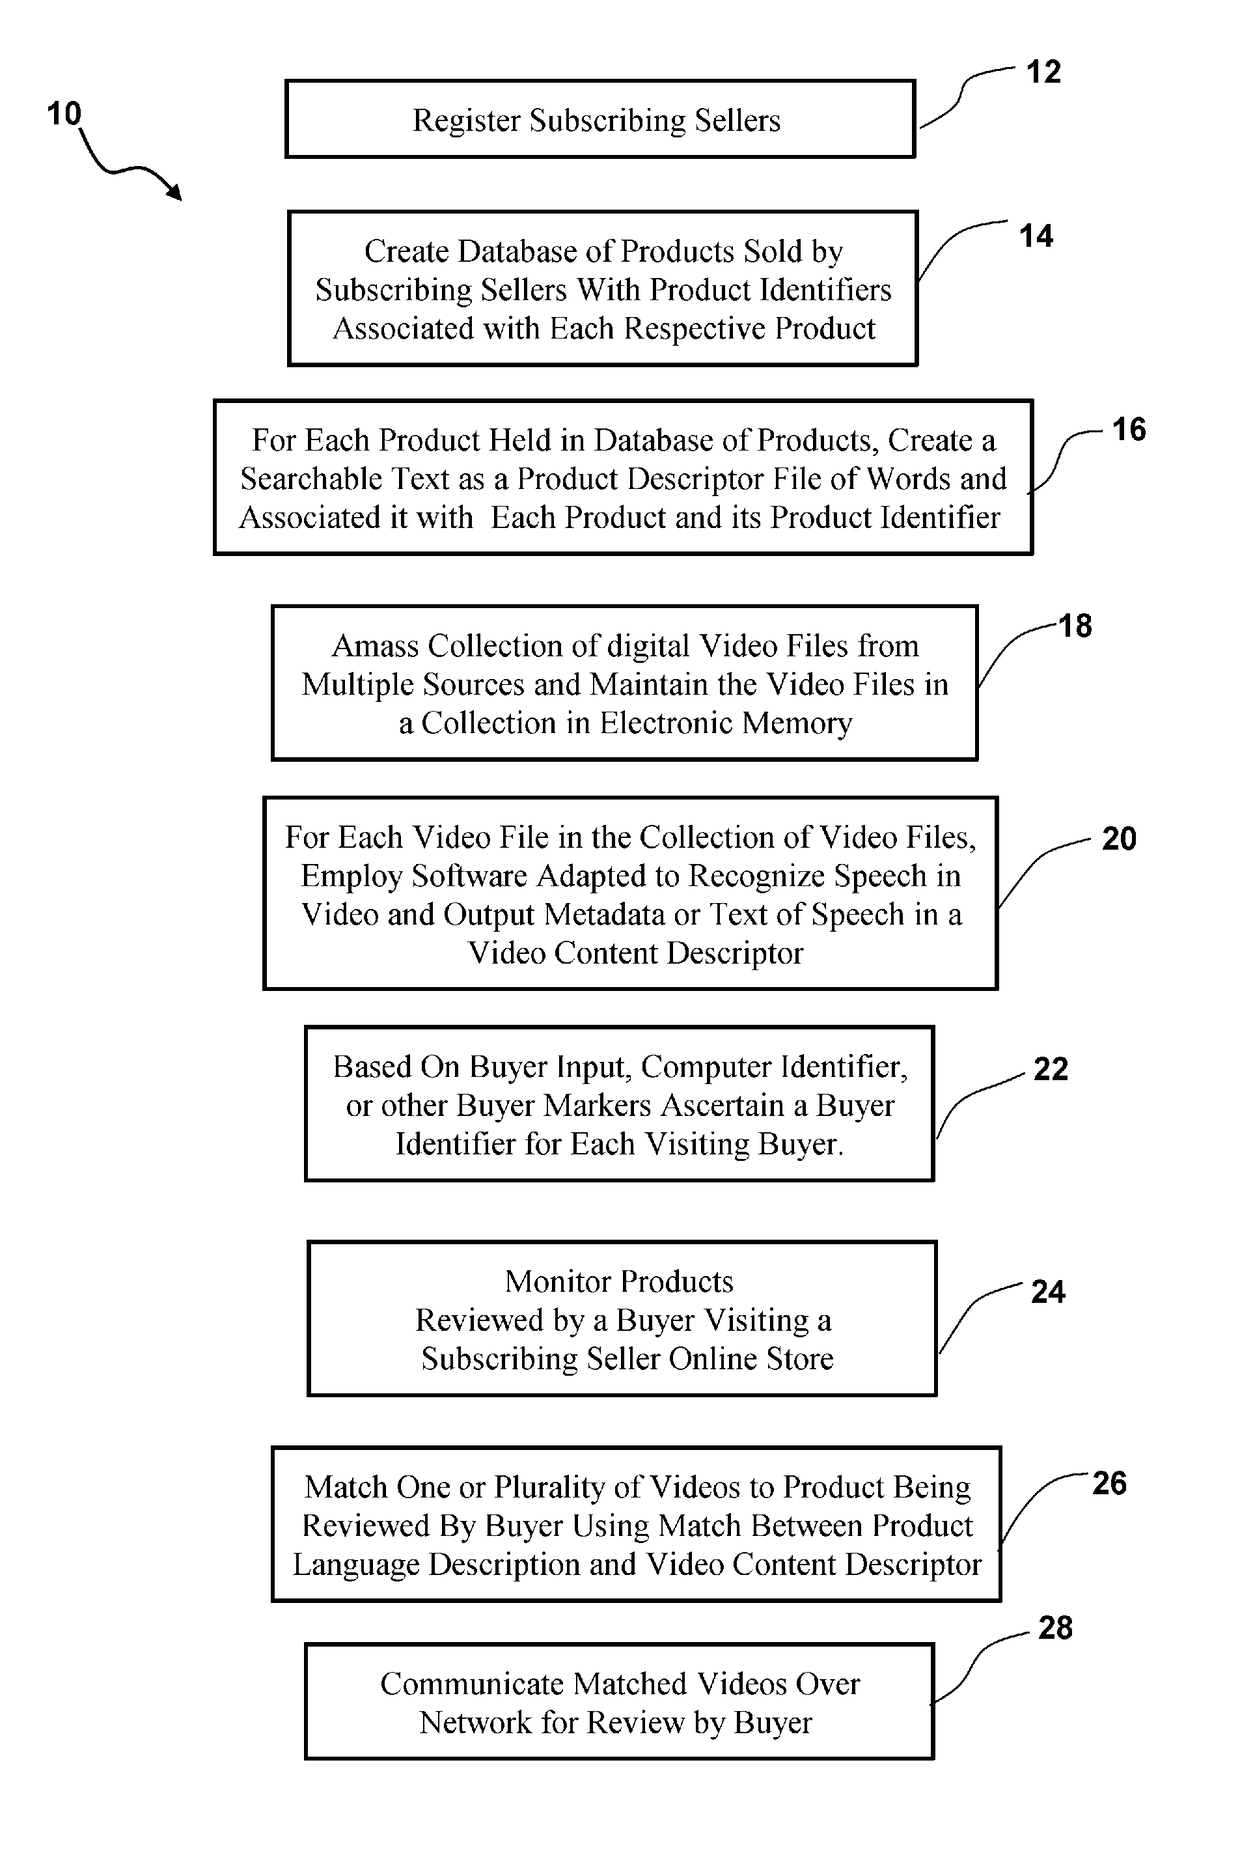 Method for providing electronic video files related to products of interest